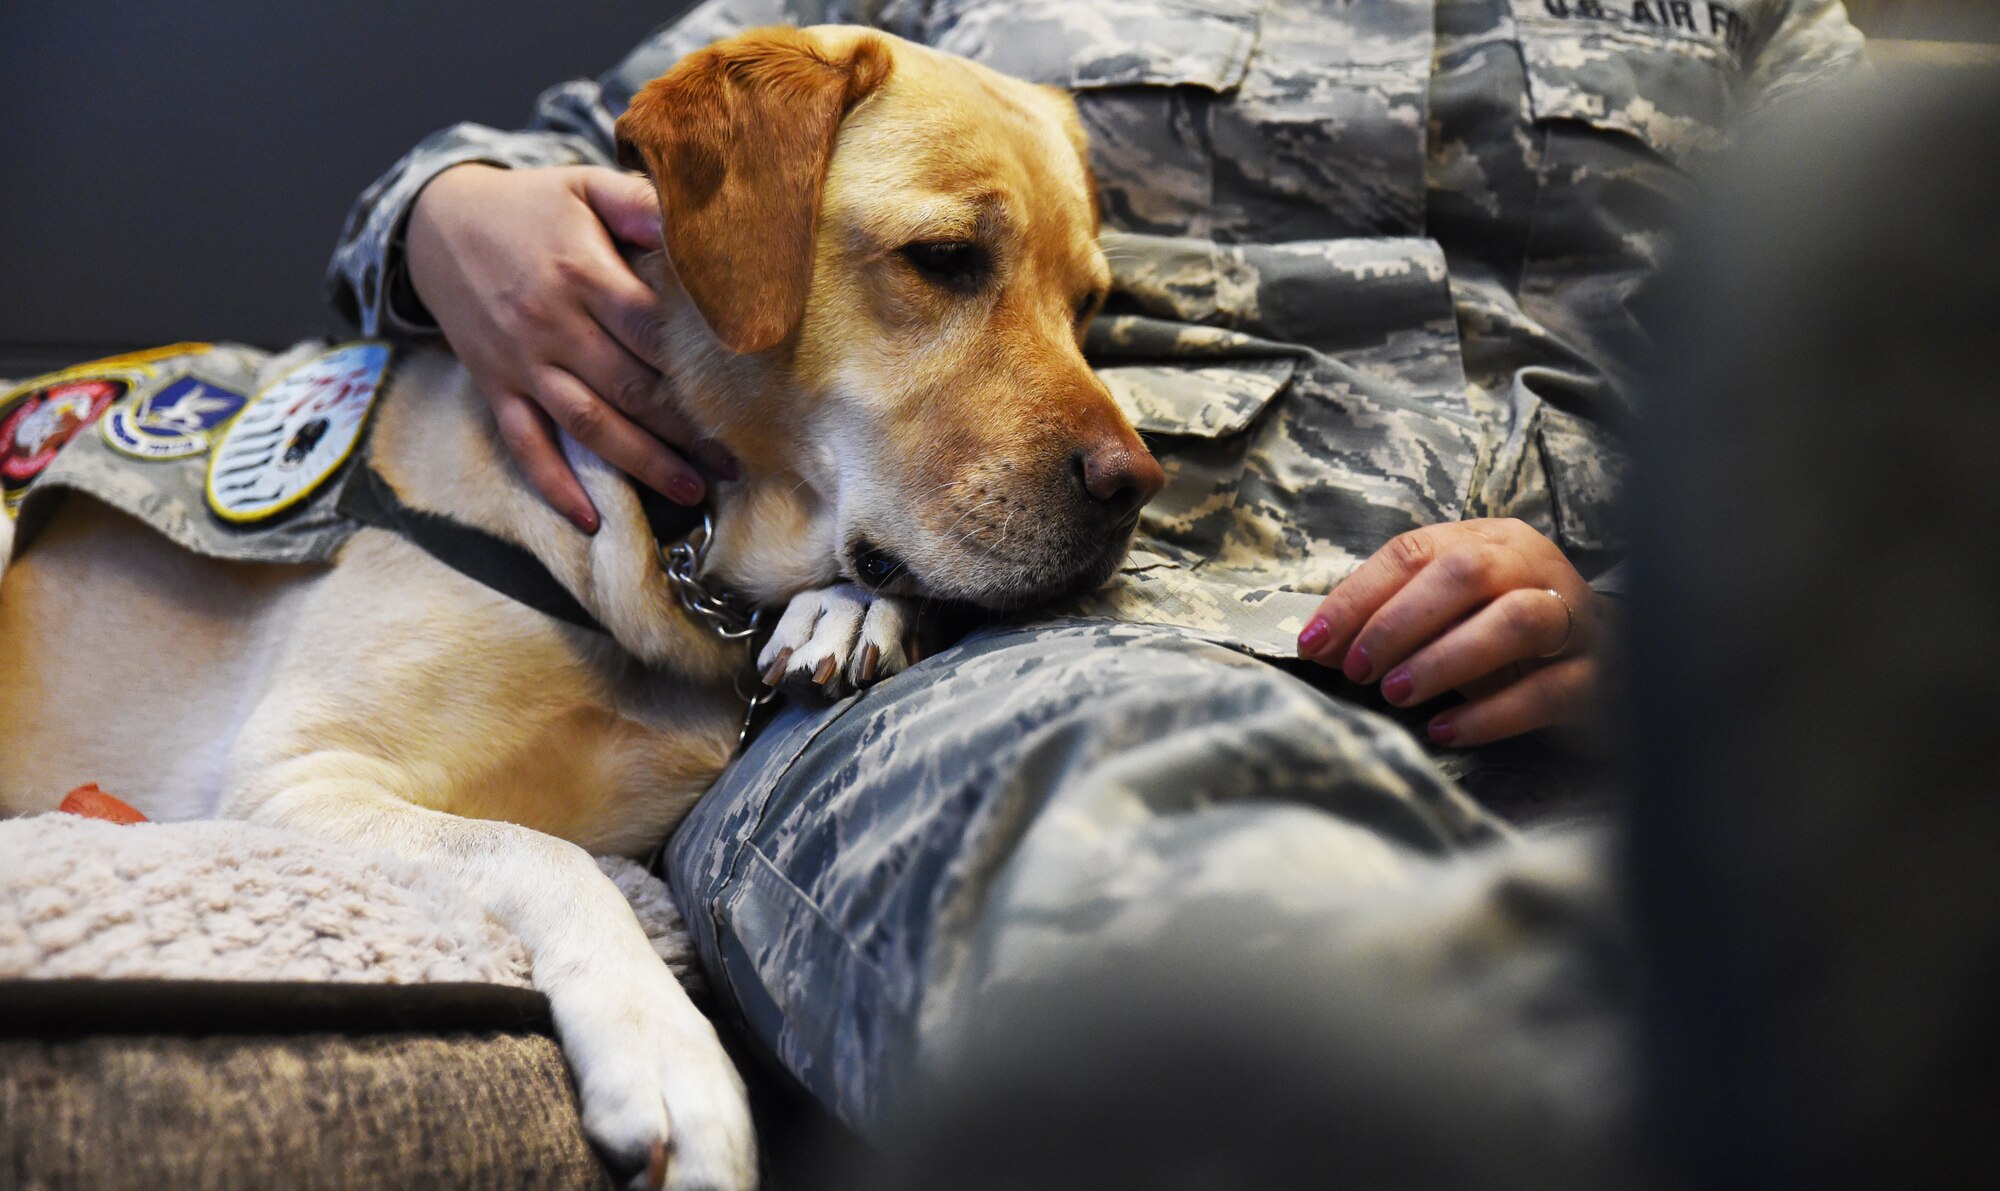 Paige, a facility therapy dog for the 144th Fighter Wing, gives affection to an Airman as the Airman talks with Dr. Stephanie Grant, 144th Fighter Wing director of psychological health, during a private counseling session.